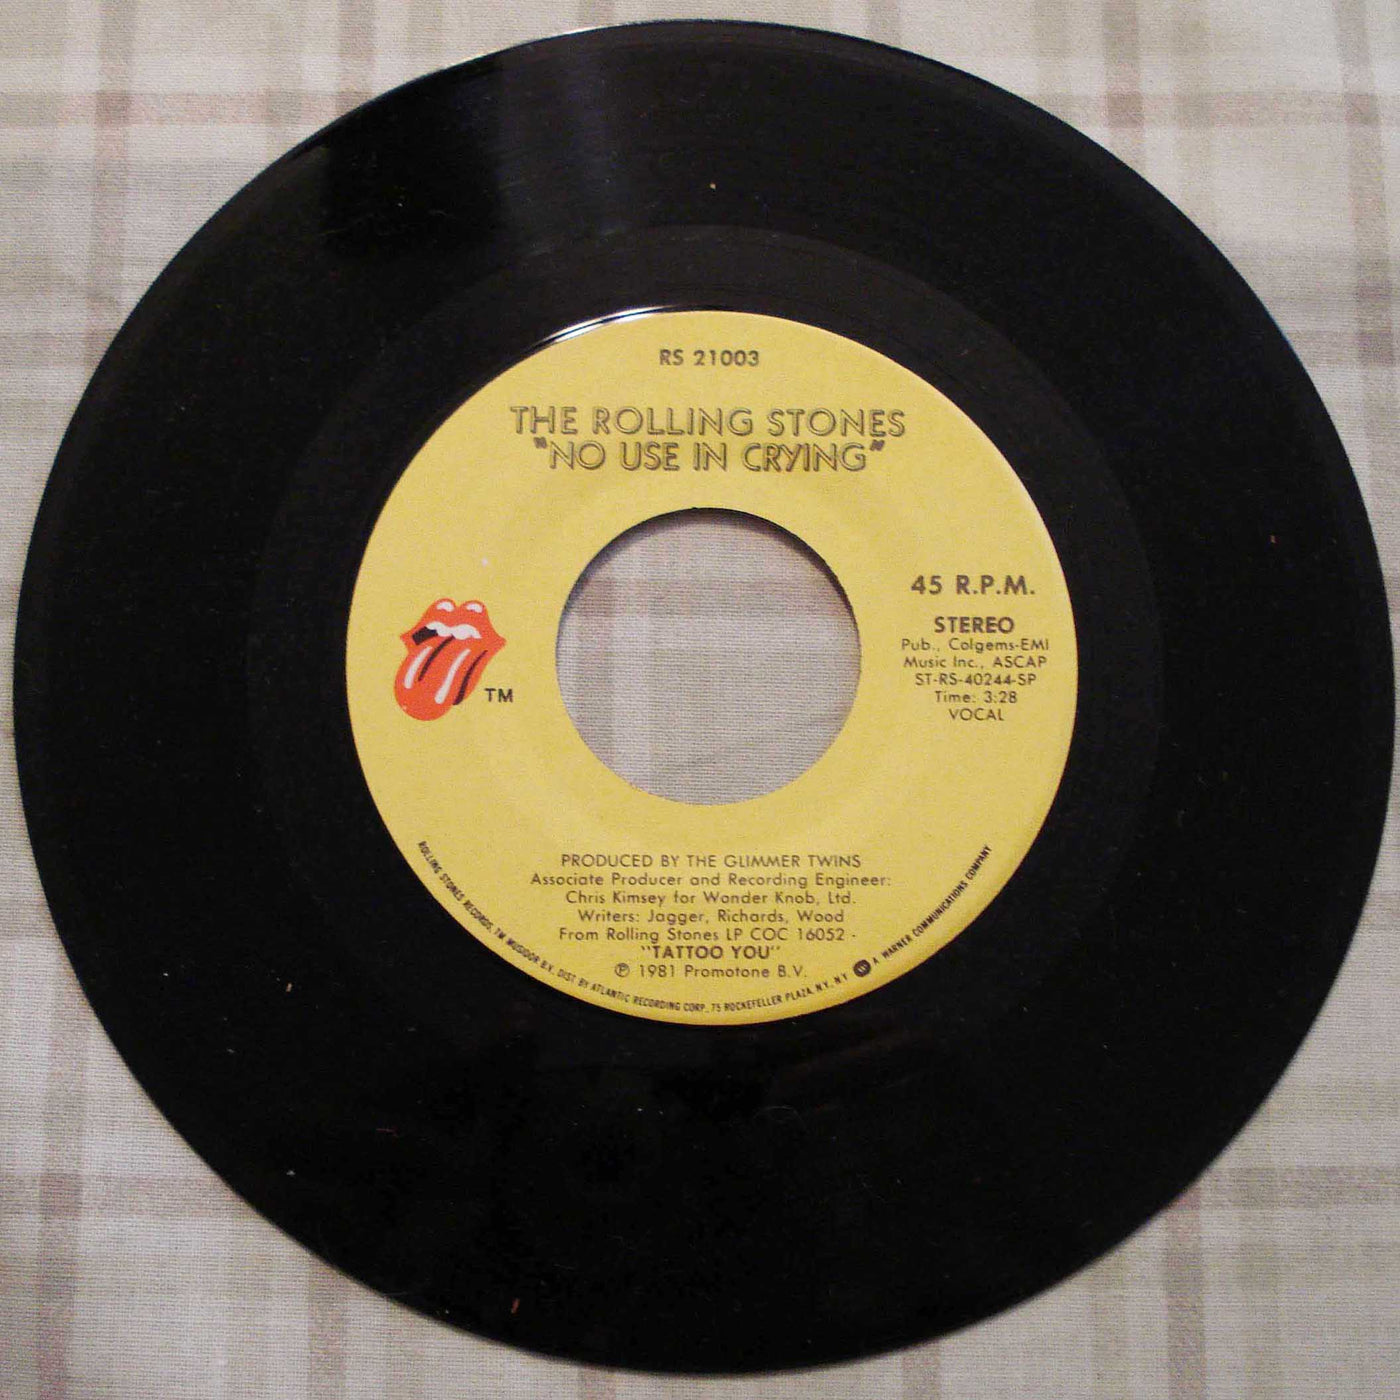 Rolling Stones - Start Me Up-No Use In Crying (1981) Vinyl Single 45rpm RS 21003